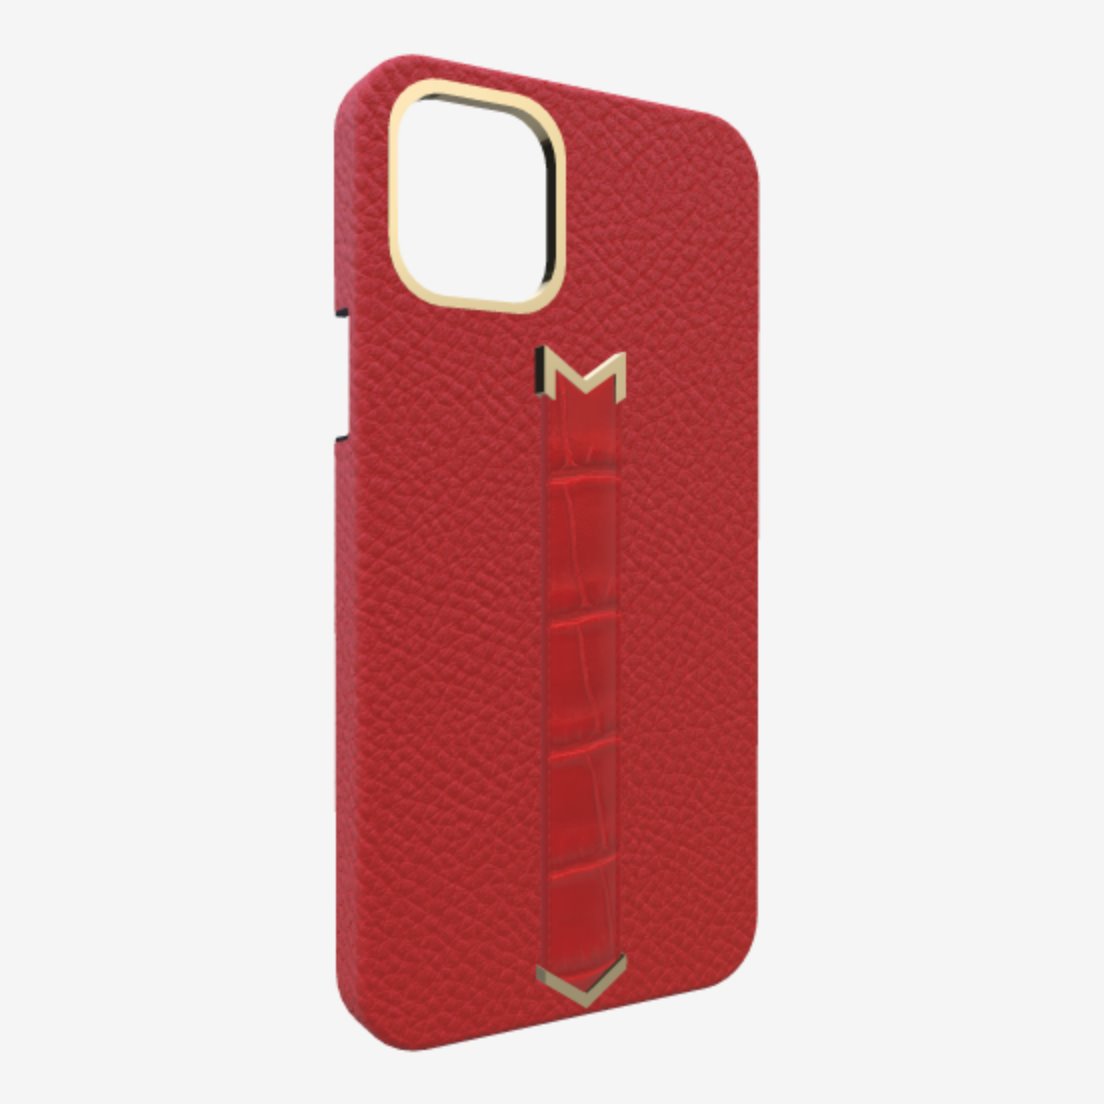 Gold Finger Strap Case for iPhone 13 Pro Max in Genuine Calfskin and Alligator Glamour Red Glamour Red 